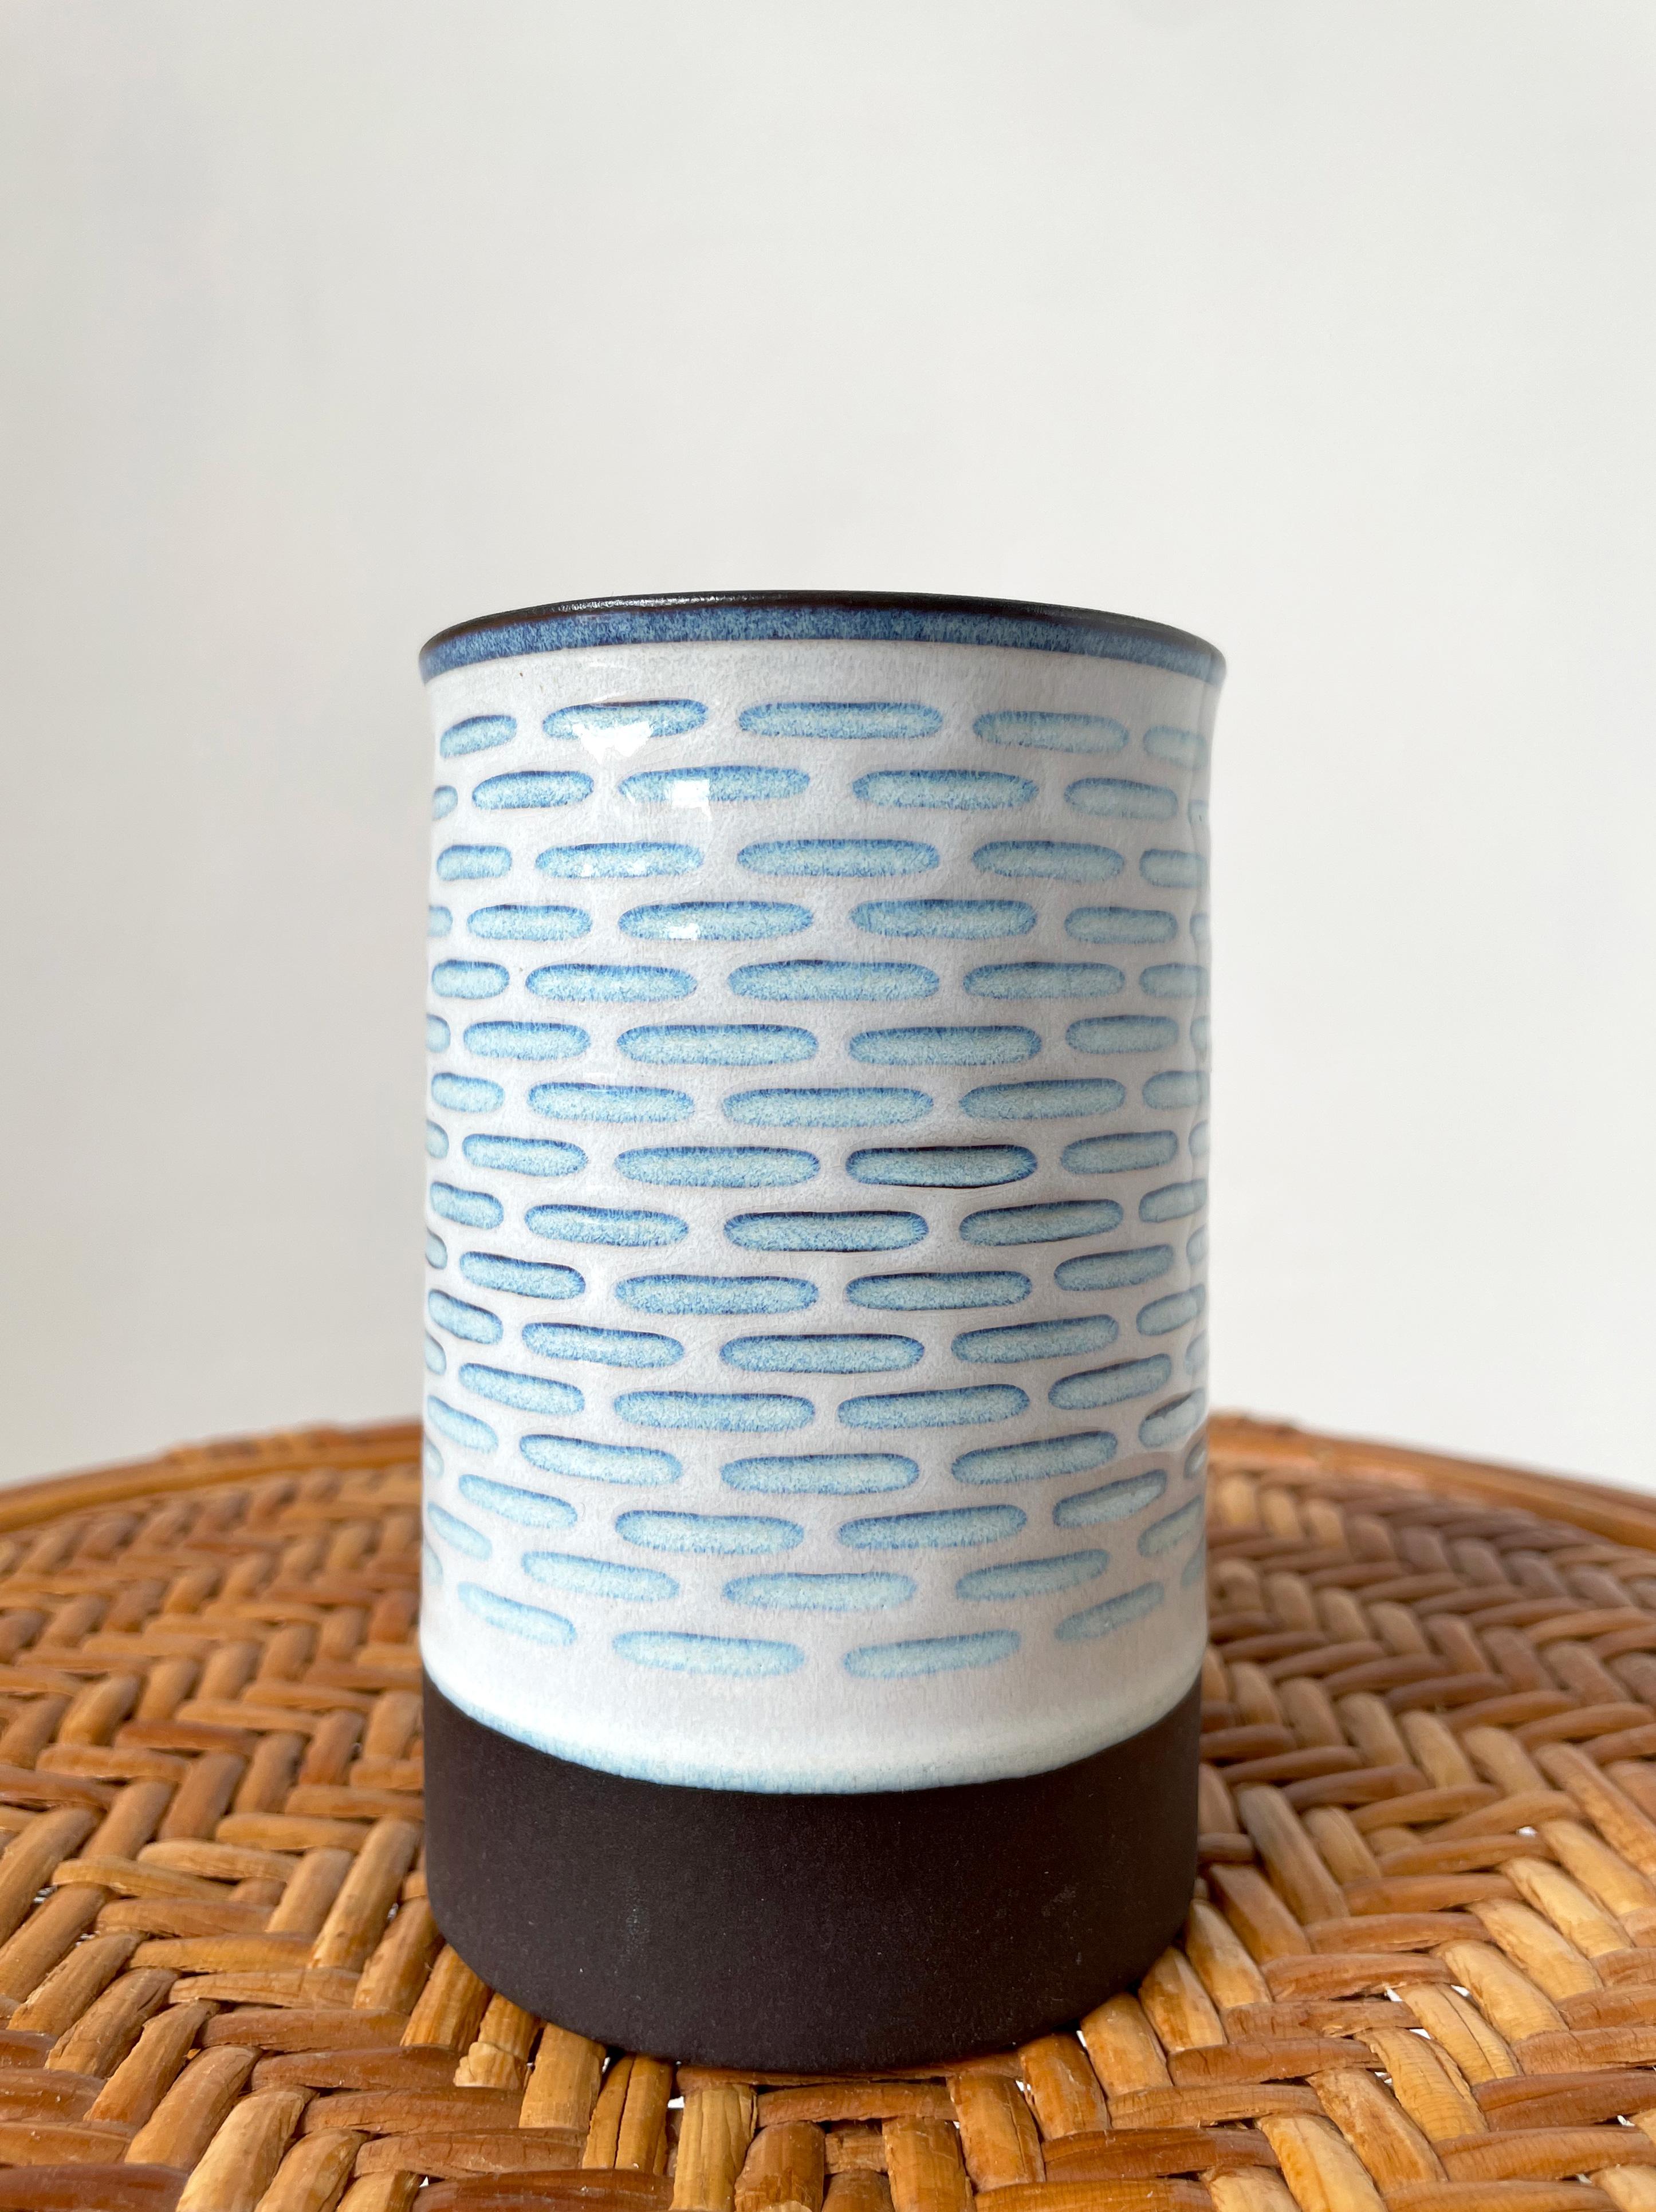 Nordic organic modern porcelain vase by Anni Rigmor Jeppesen for Aluminia, Royal Copenhagen in the late 1950s. Shiny light blue graphic lines on white background over matte chocolate glaze on top lining and base. Shiny lilac blue glaze on the